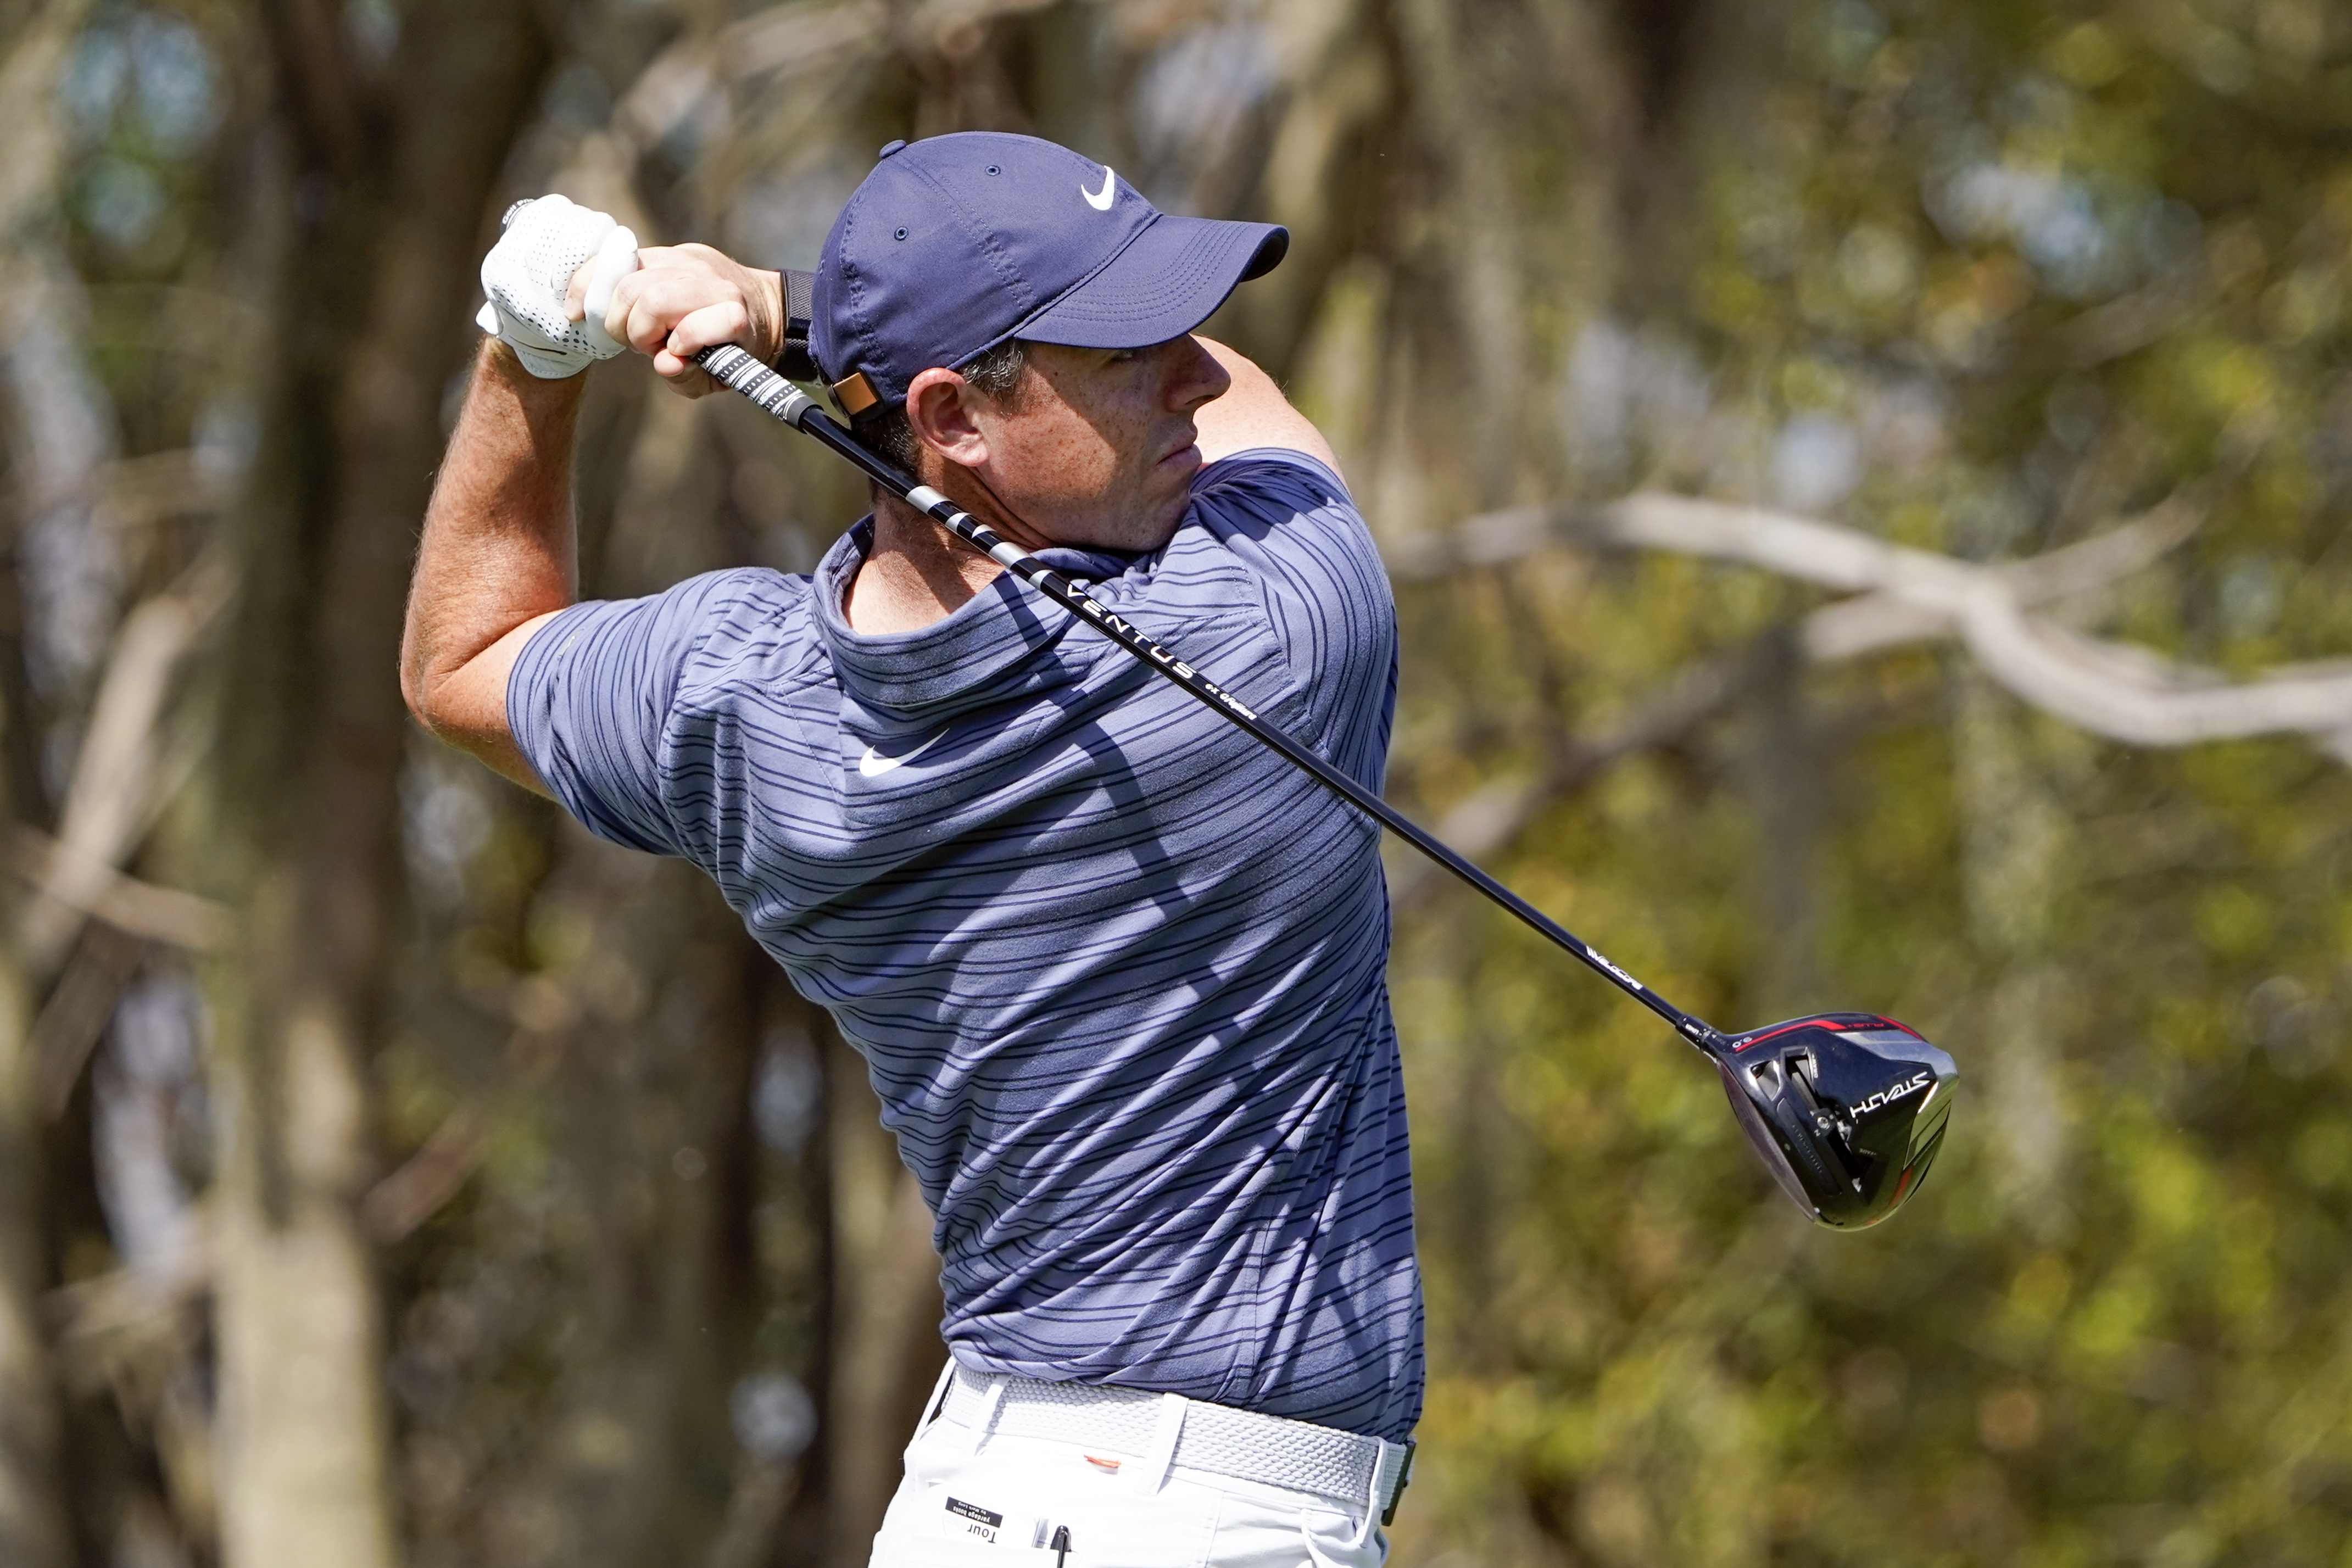 With 65, Rory McIlroy off to another great start at Bay Hill